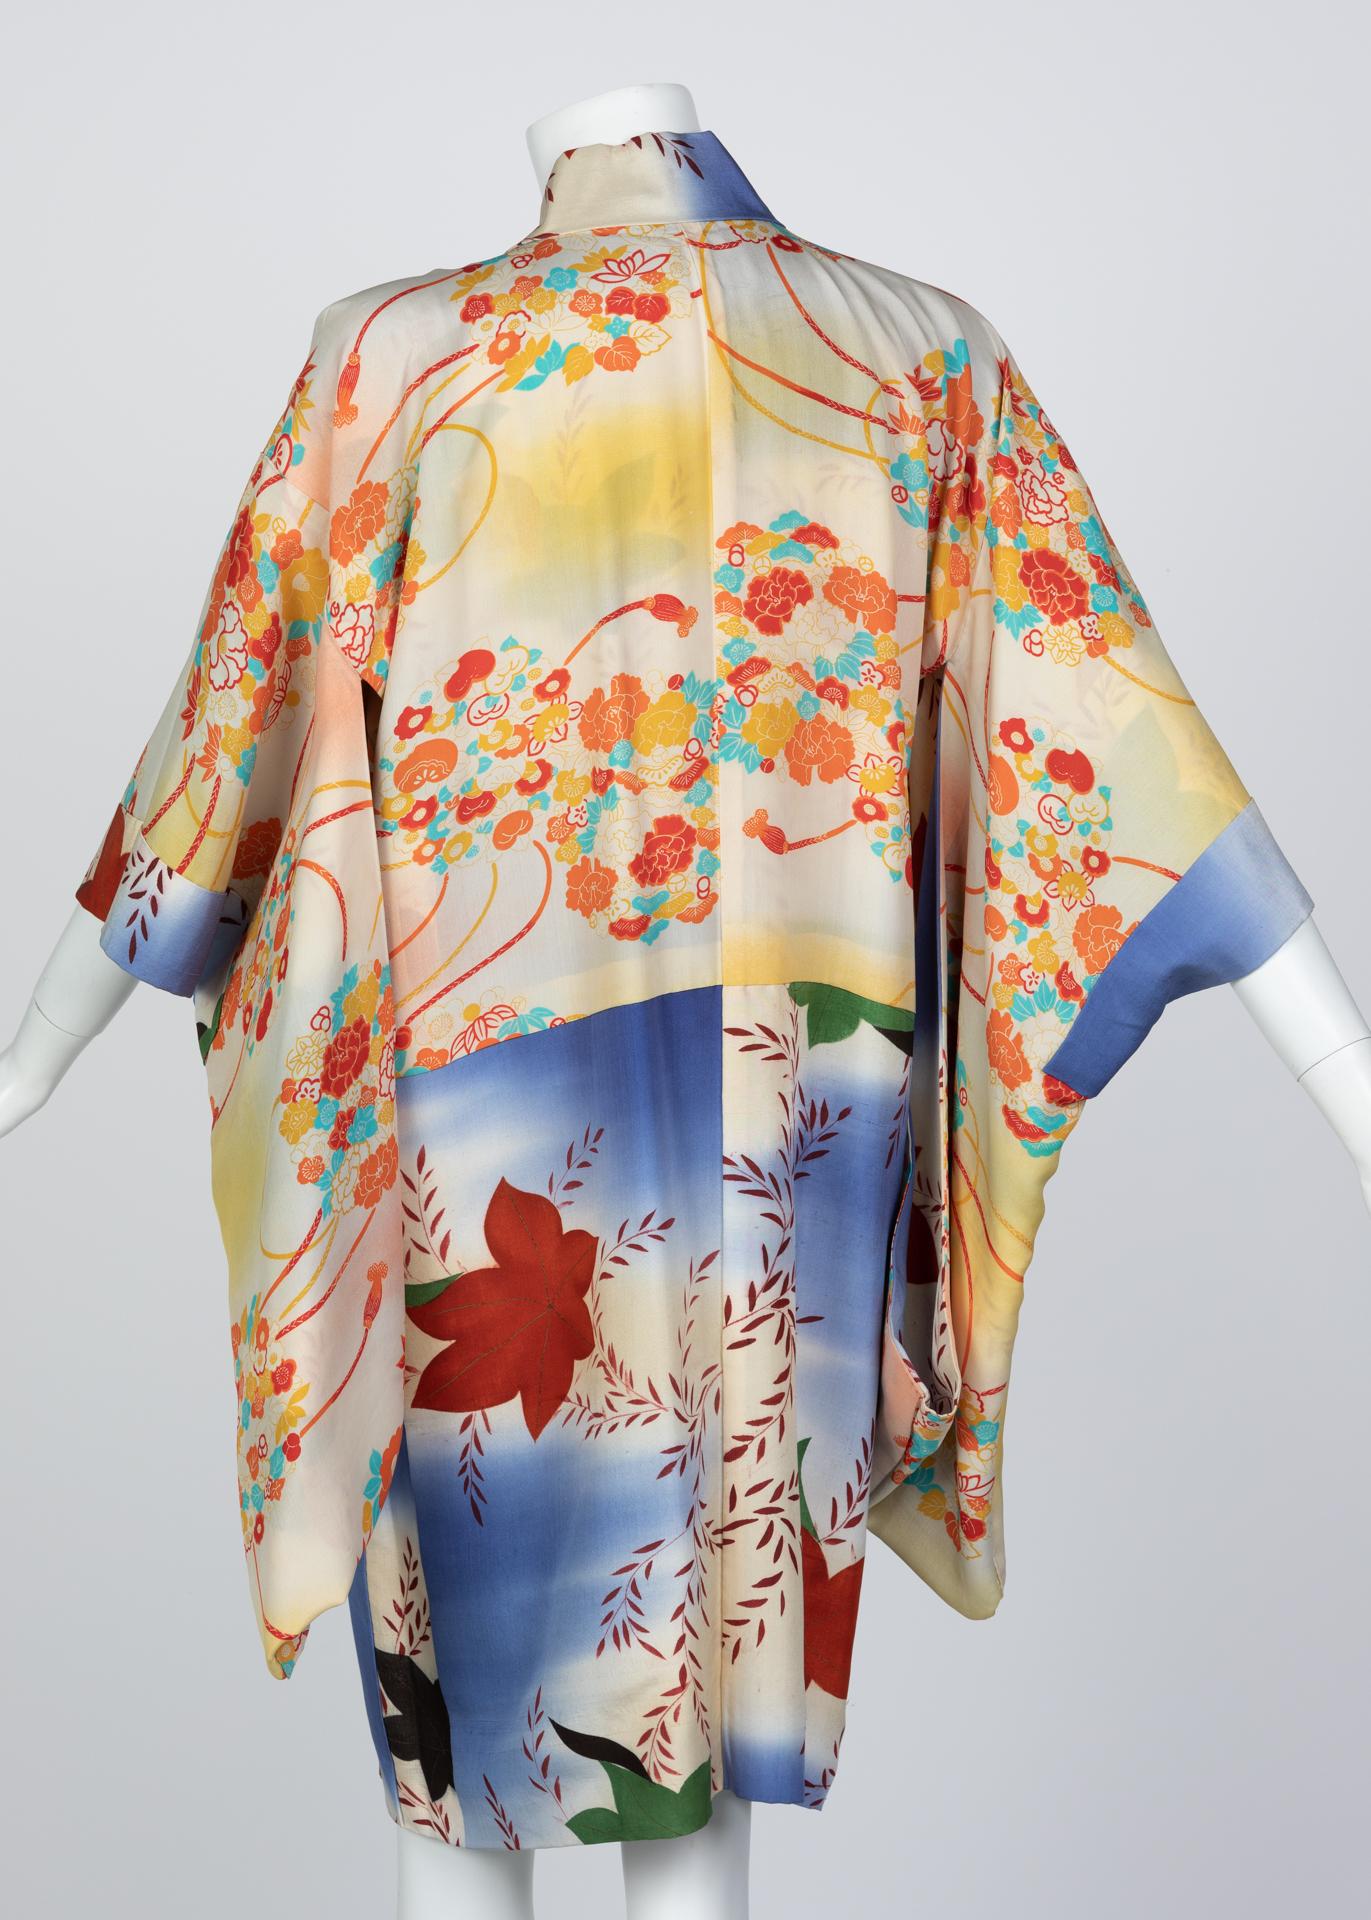 Kimono is a respected and the highly decorated traditional robe from Japan. These robes have been the center of inspiration for many Western designers and have been edited over time to appeal to a modern audience while maintaining many of the